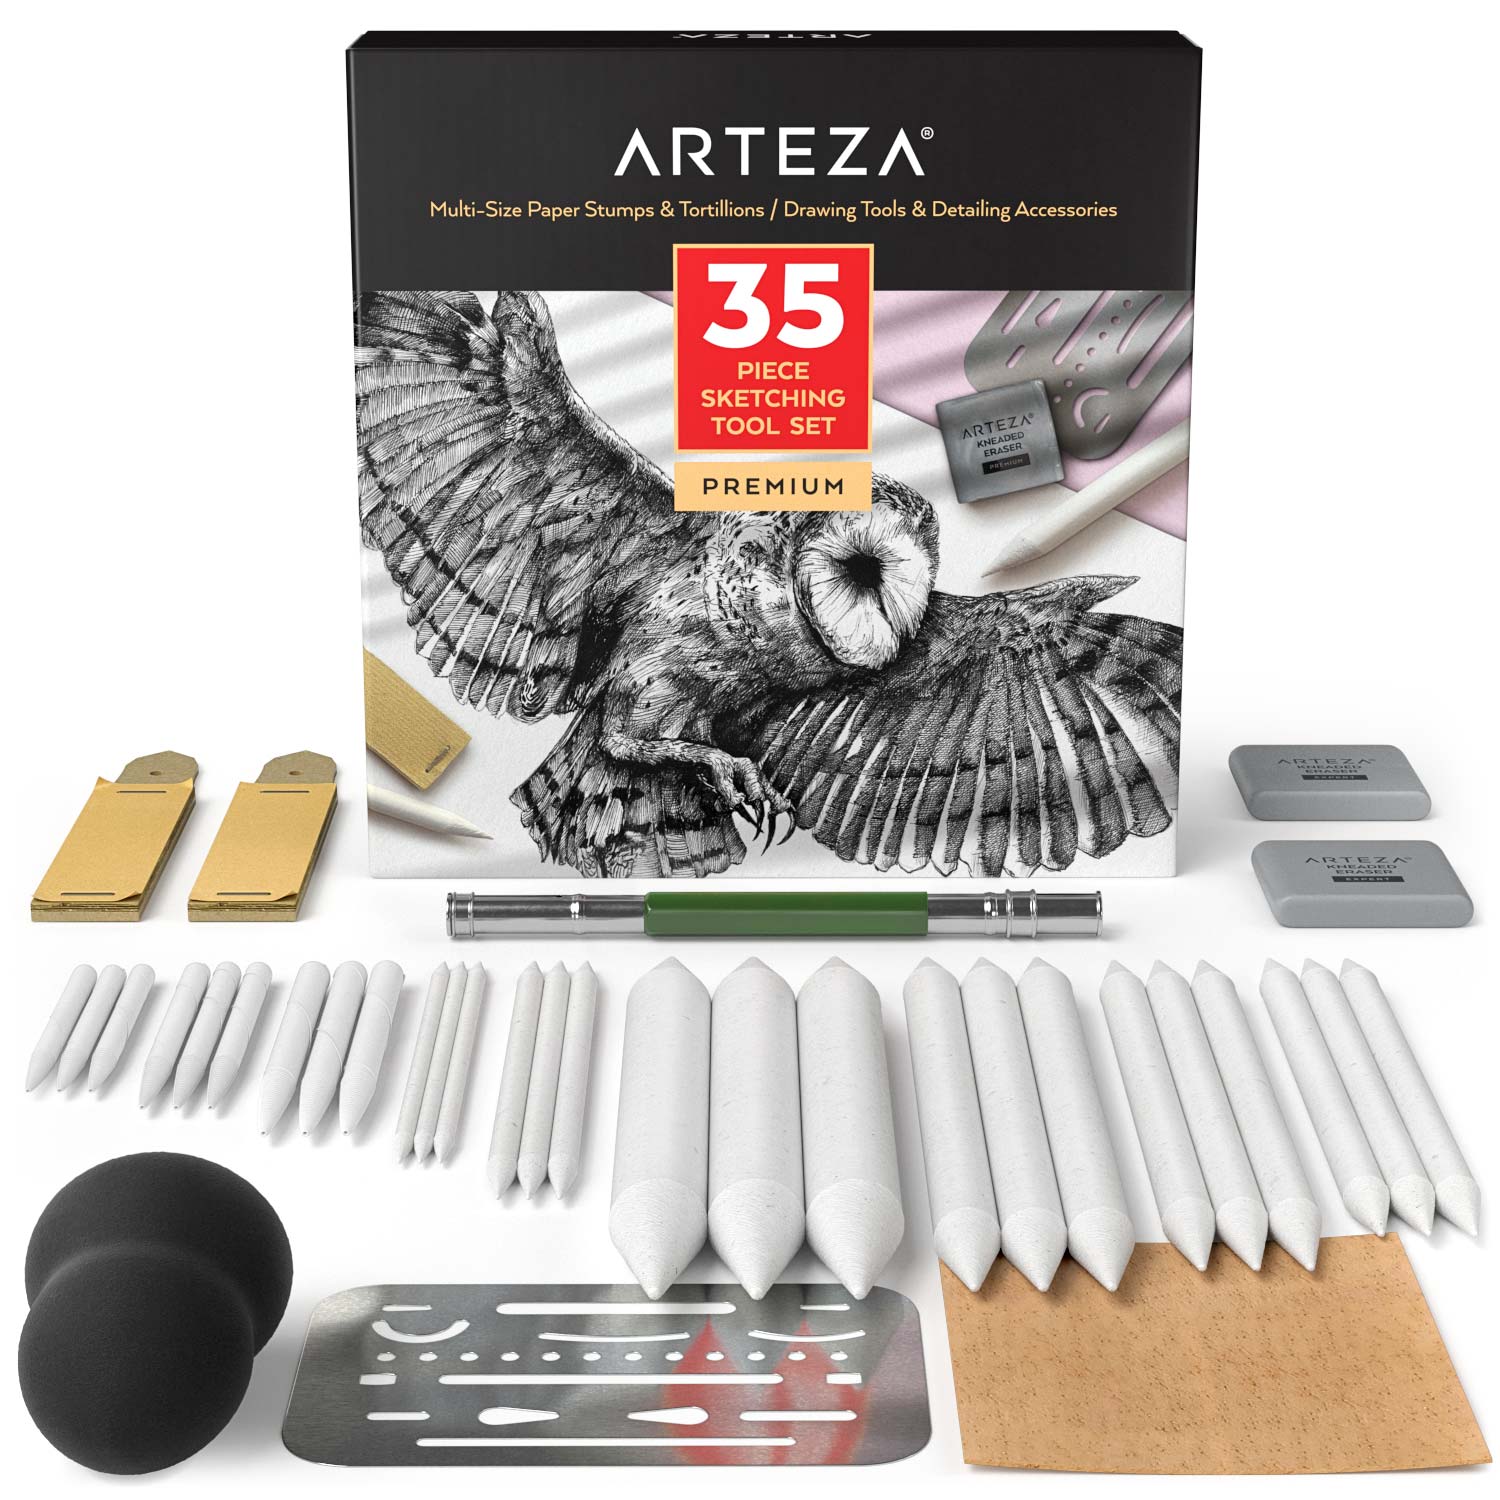 Complete Artistic Drawing Tools for Artists & Creatives - Drawing